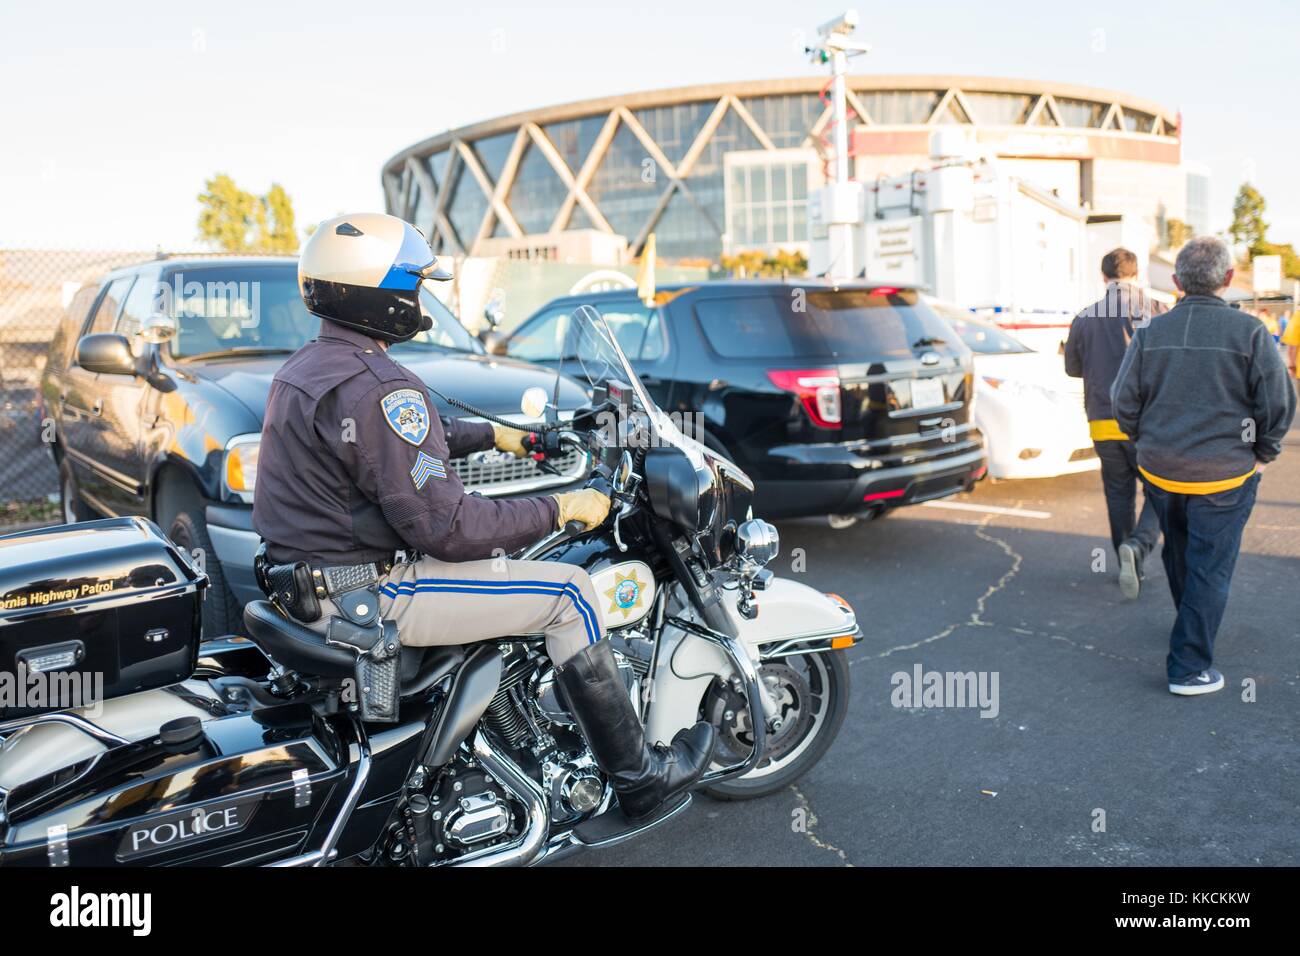 Outside Oracle Arena, an Oakland Police Department motorcycle police officer patrols the crowd following a Golden State Warriors basketball game, Oakland, California, June 5, 2016. Stock Photo